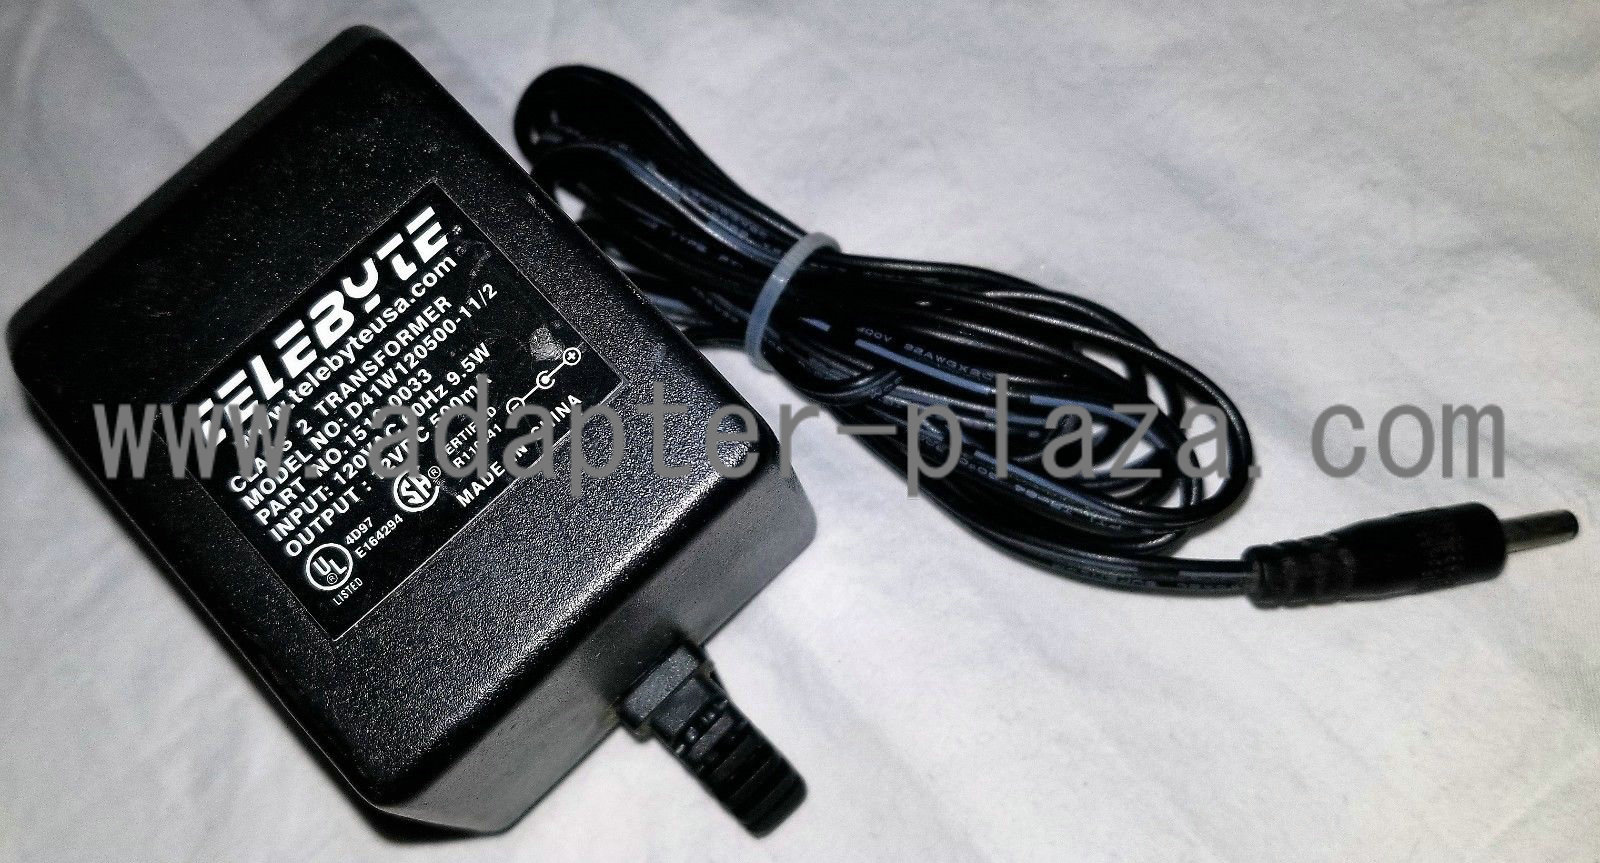 New Telebyte 12V 500mA D41W120500-11/2 1510-0033 AC DC Adapter Charger Class 2 Power Supply